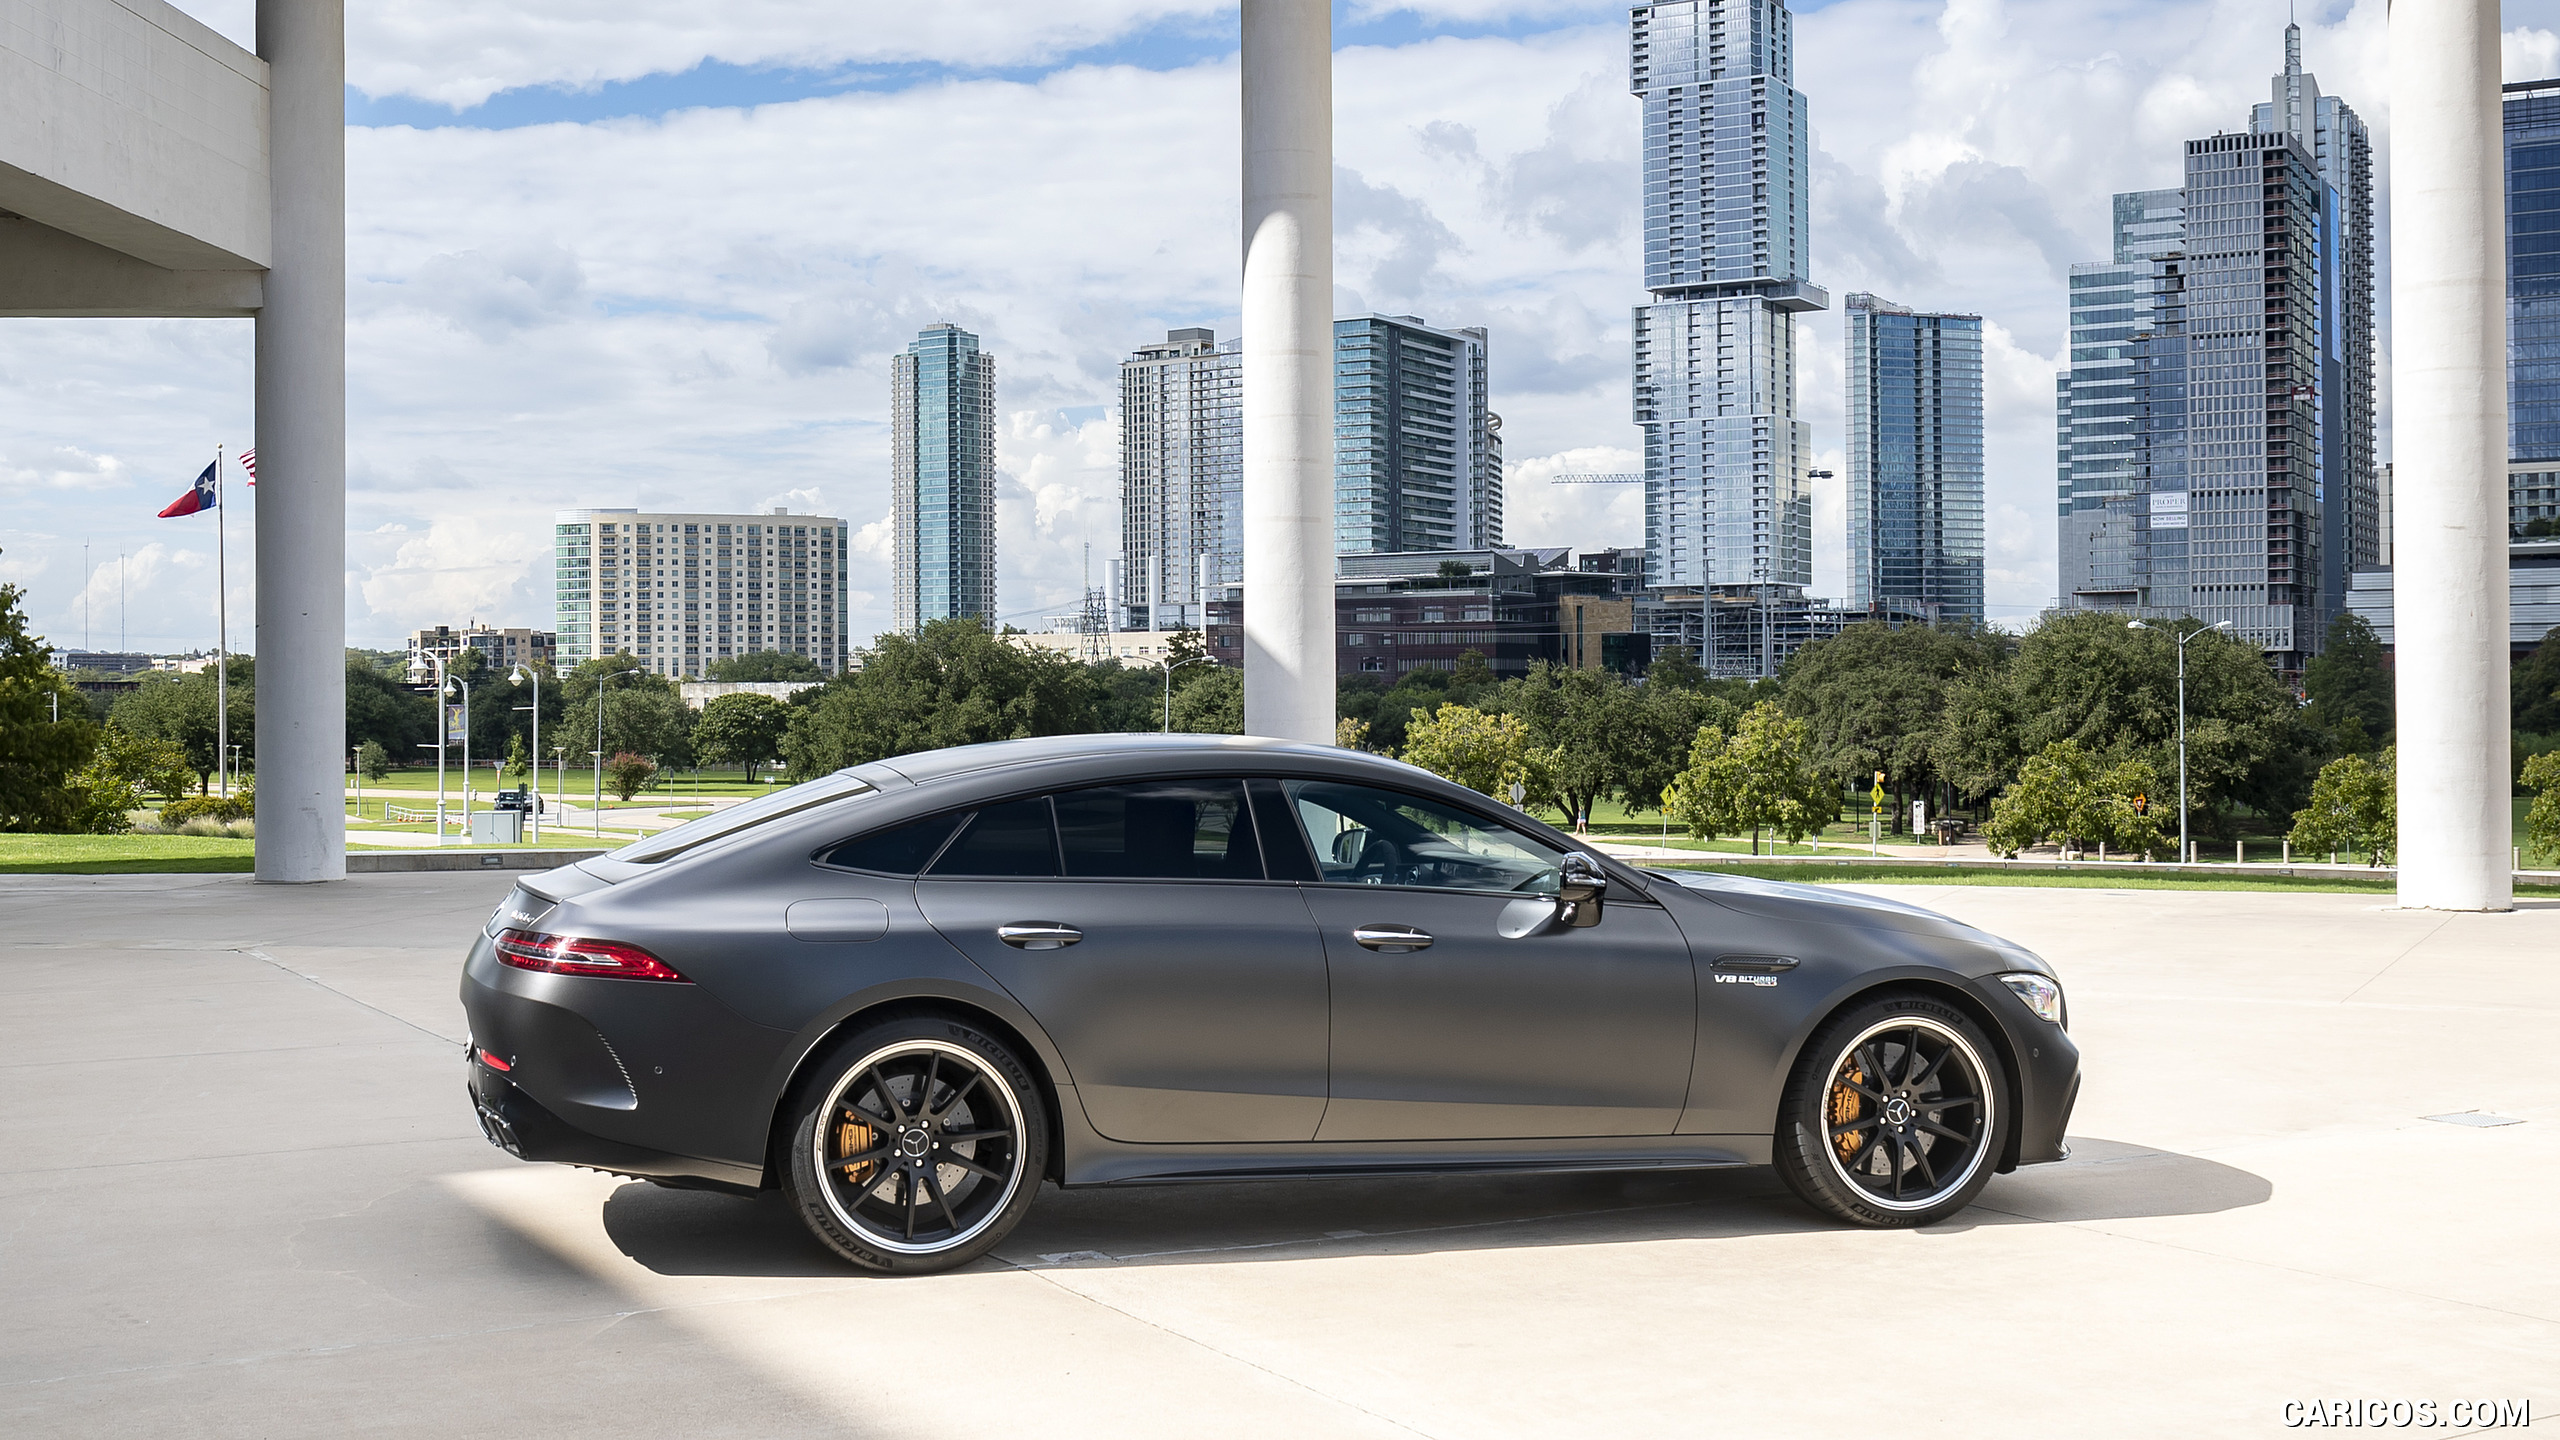 2019 Mercedes-AMG GT 63 S 4MATIC+ 4-Door Coupe - Side, #215 of 427